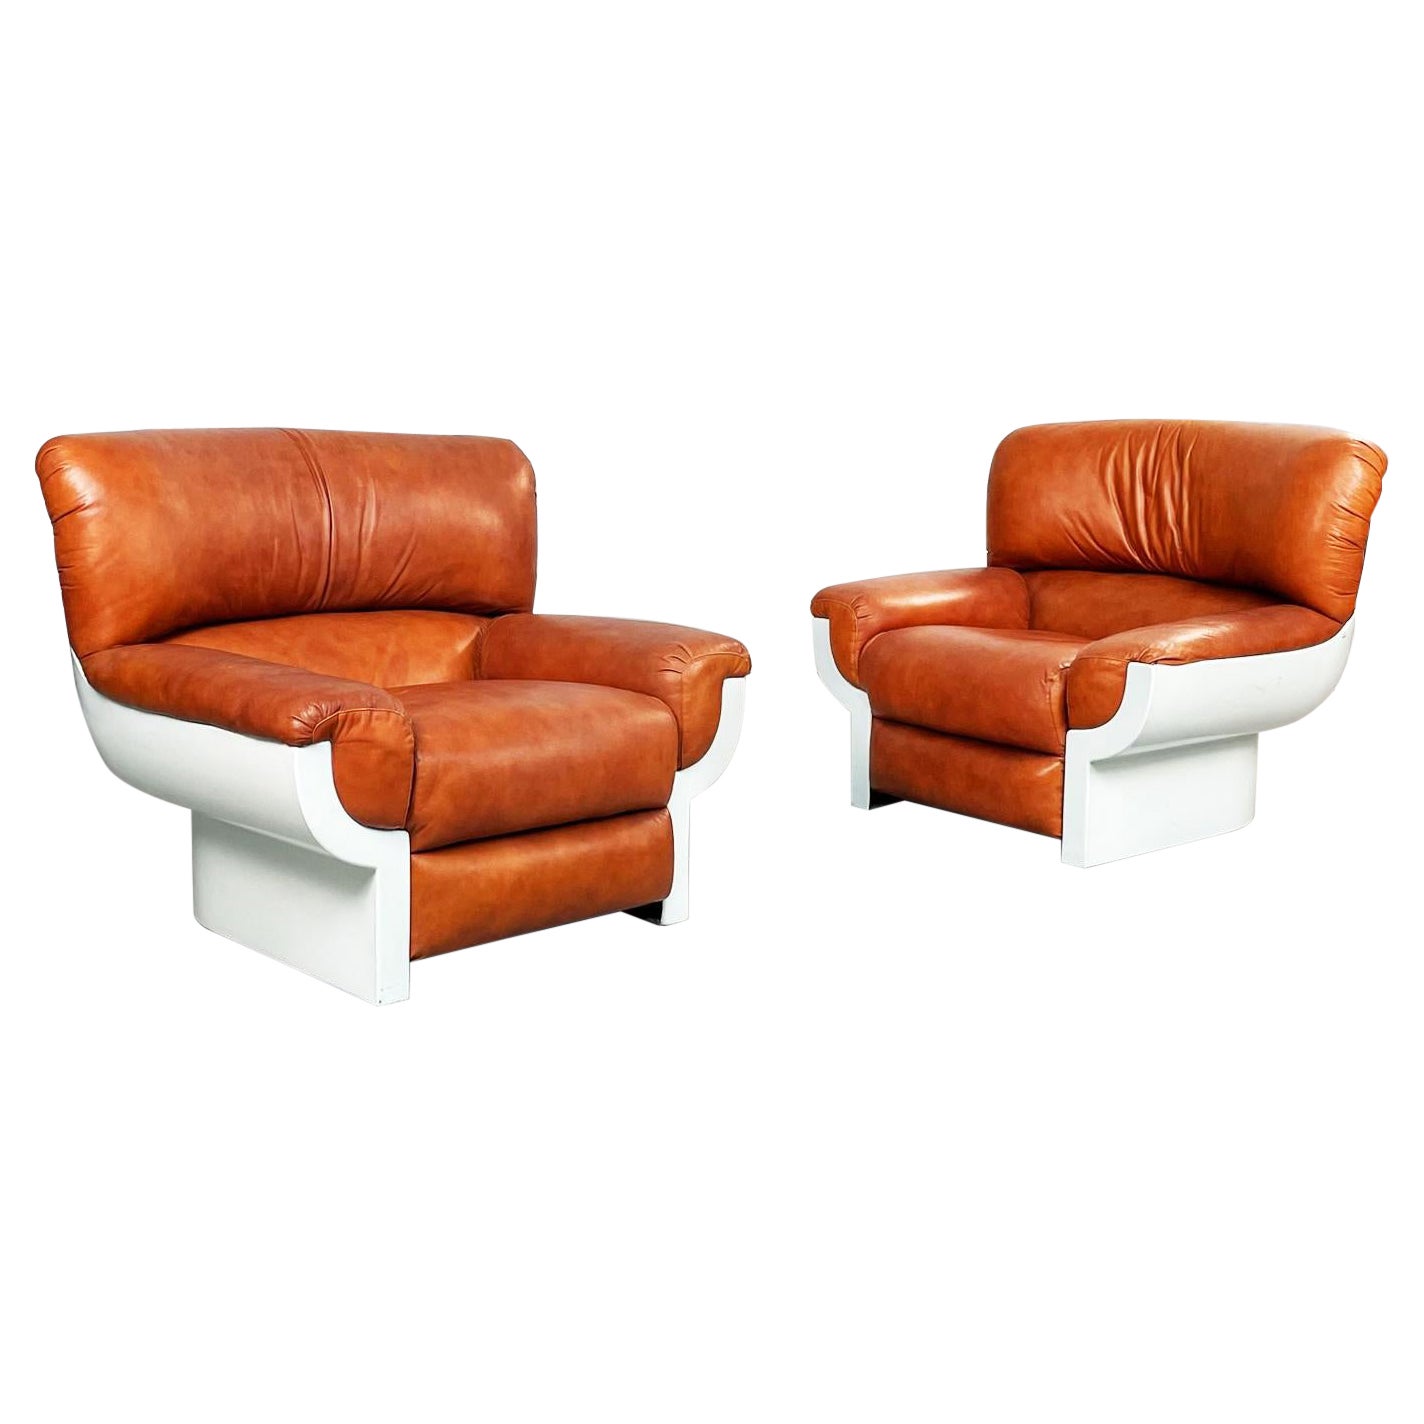 Italian Mid-Century Brown Leather Armchairs Flou by Betti Habitat Ids, 1970s For Sale